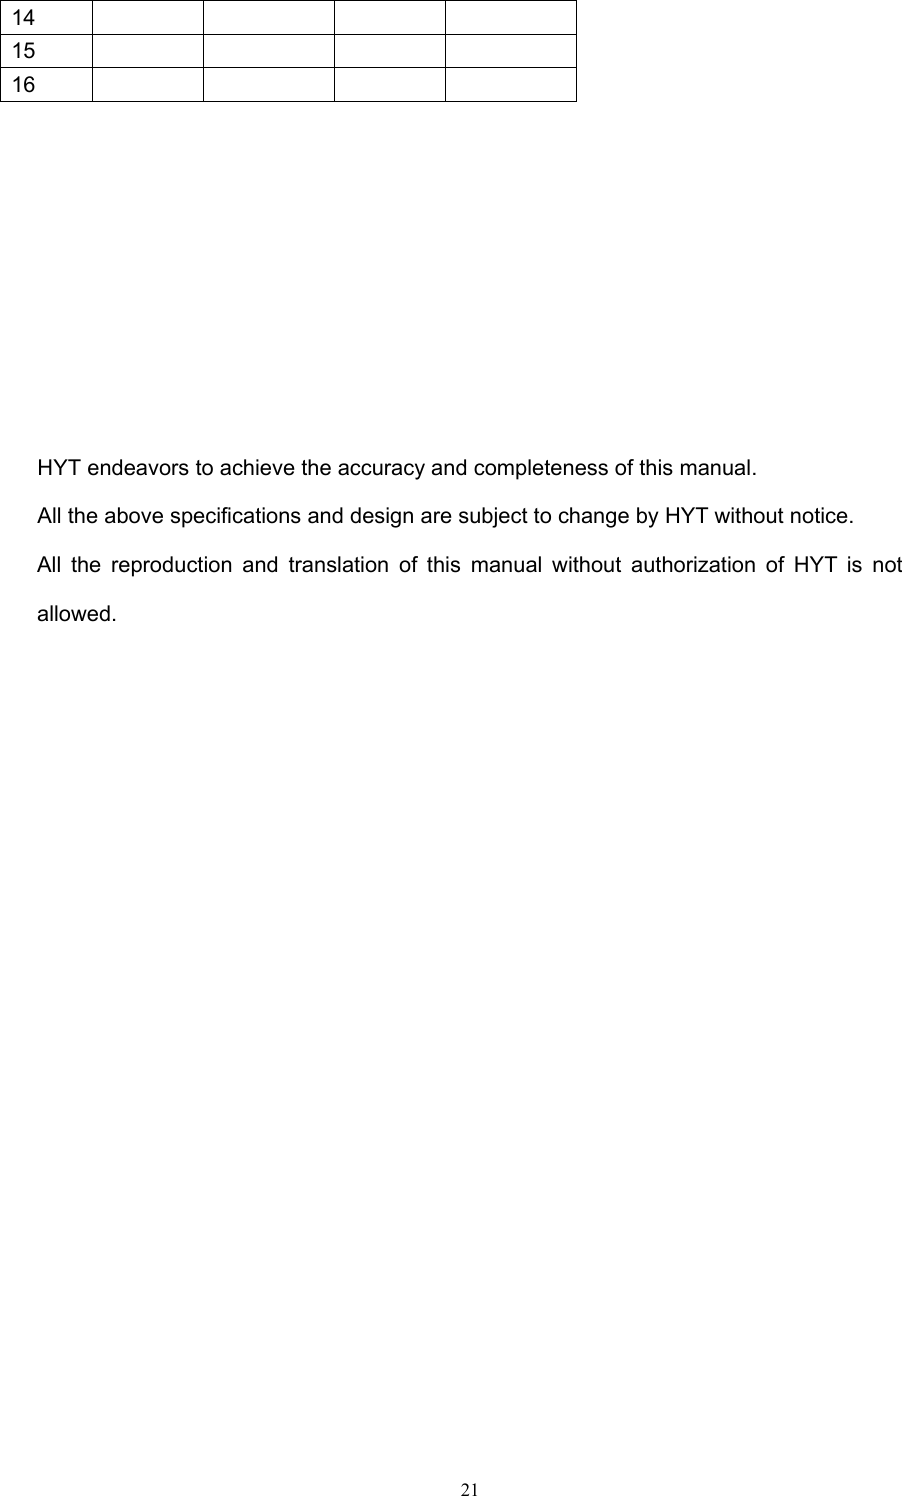  2114      15      16             HYT endeavors to achieve the accuracy and completeness of this manual.   All the above specifications and design are subject to change by HYT without notice. All the reproduction and translation of this manual without authorization of HYT is not allowed. 